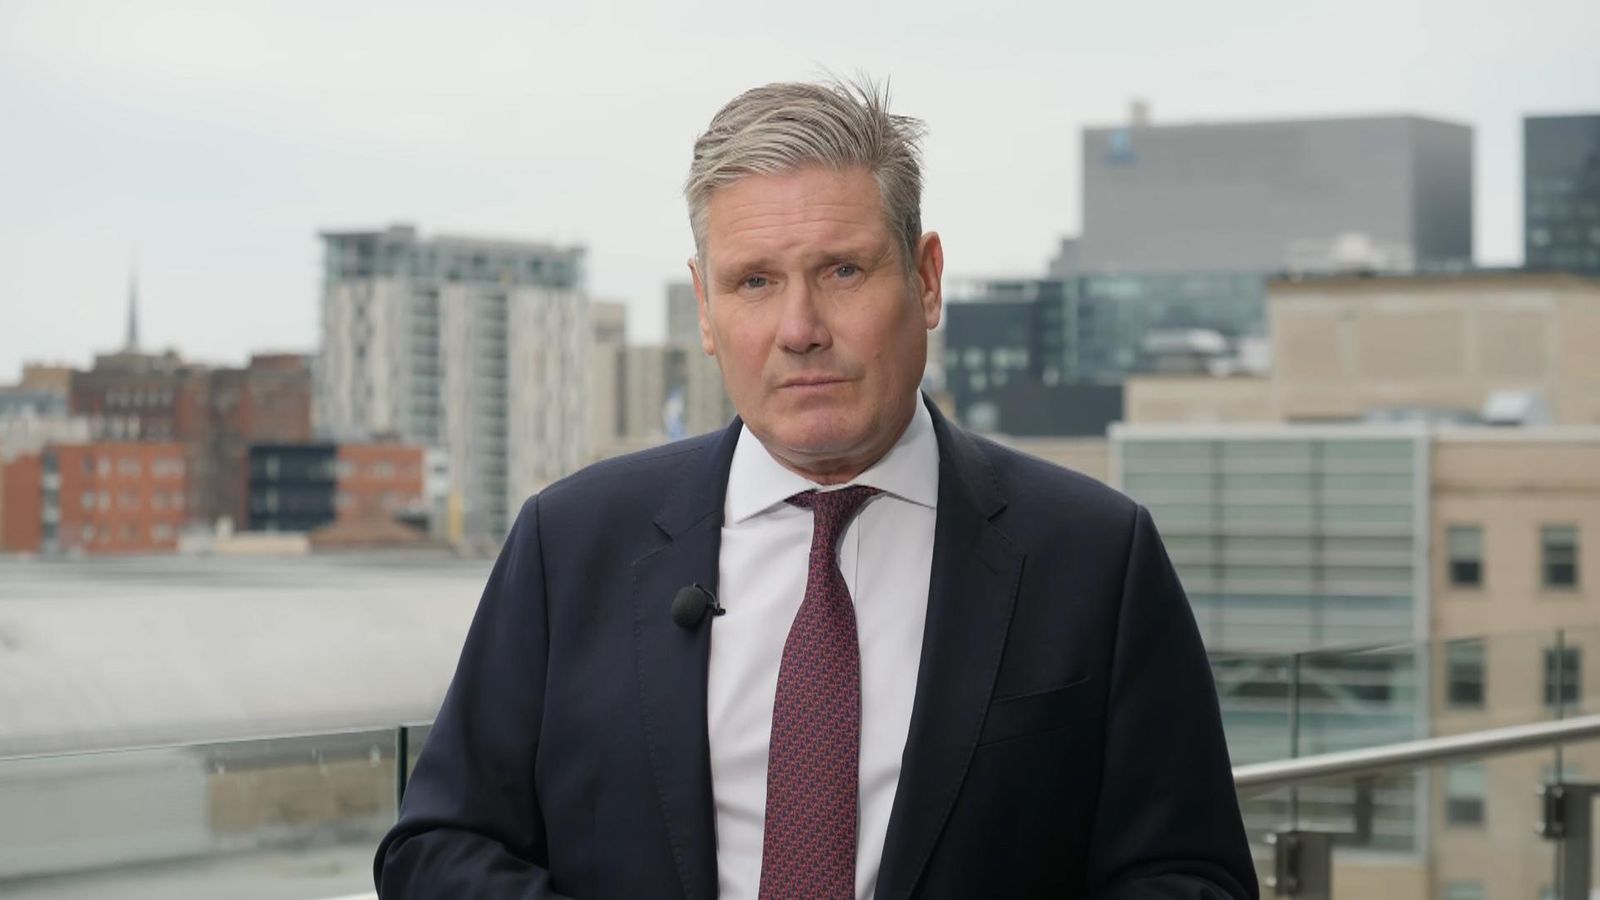 Keir Starmer rejects 'nonsense' claims that Labour immigration plans would increase asylum seeker numbers